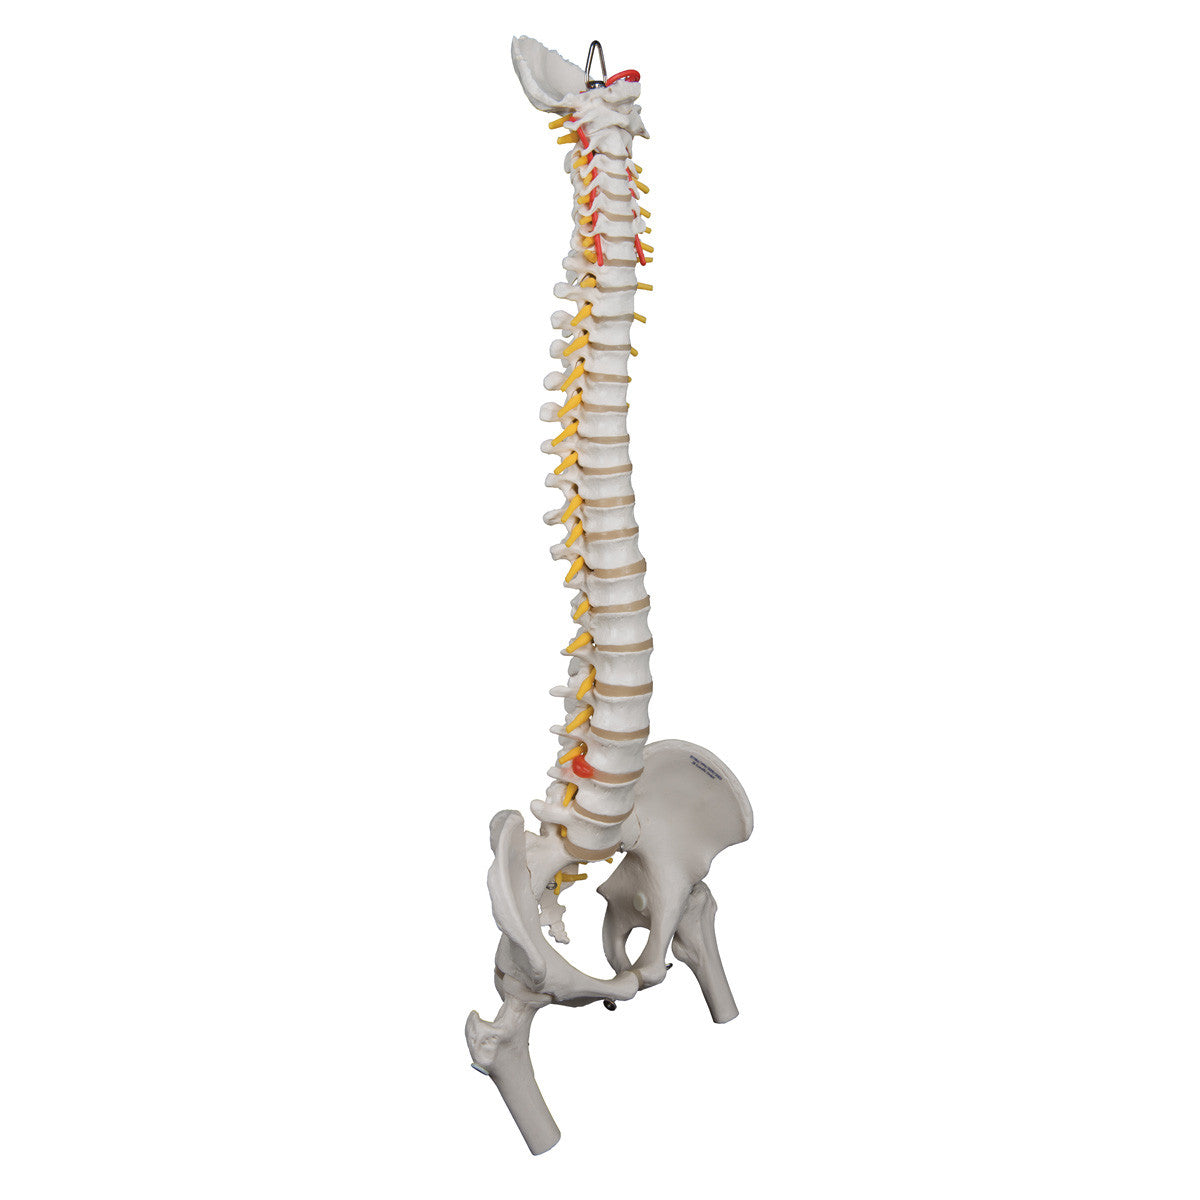 a59-2_02_1200_1200_highly-flexible-human-spine-model-mounted-on-a-flexible-core-with-femur-heads-3b-smart-anatomy__41346.1589753021.1280.1280.jpg